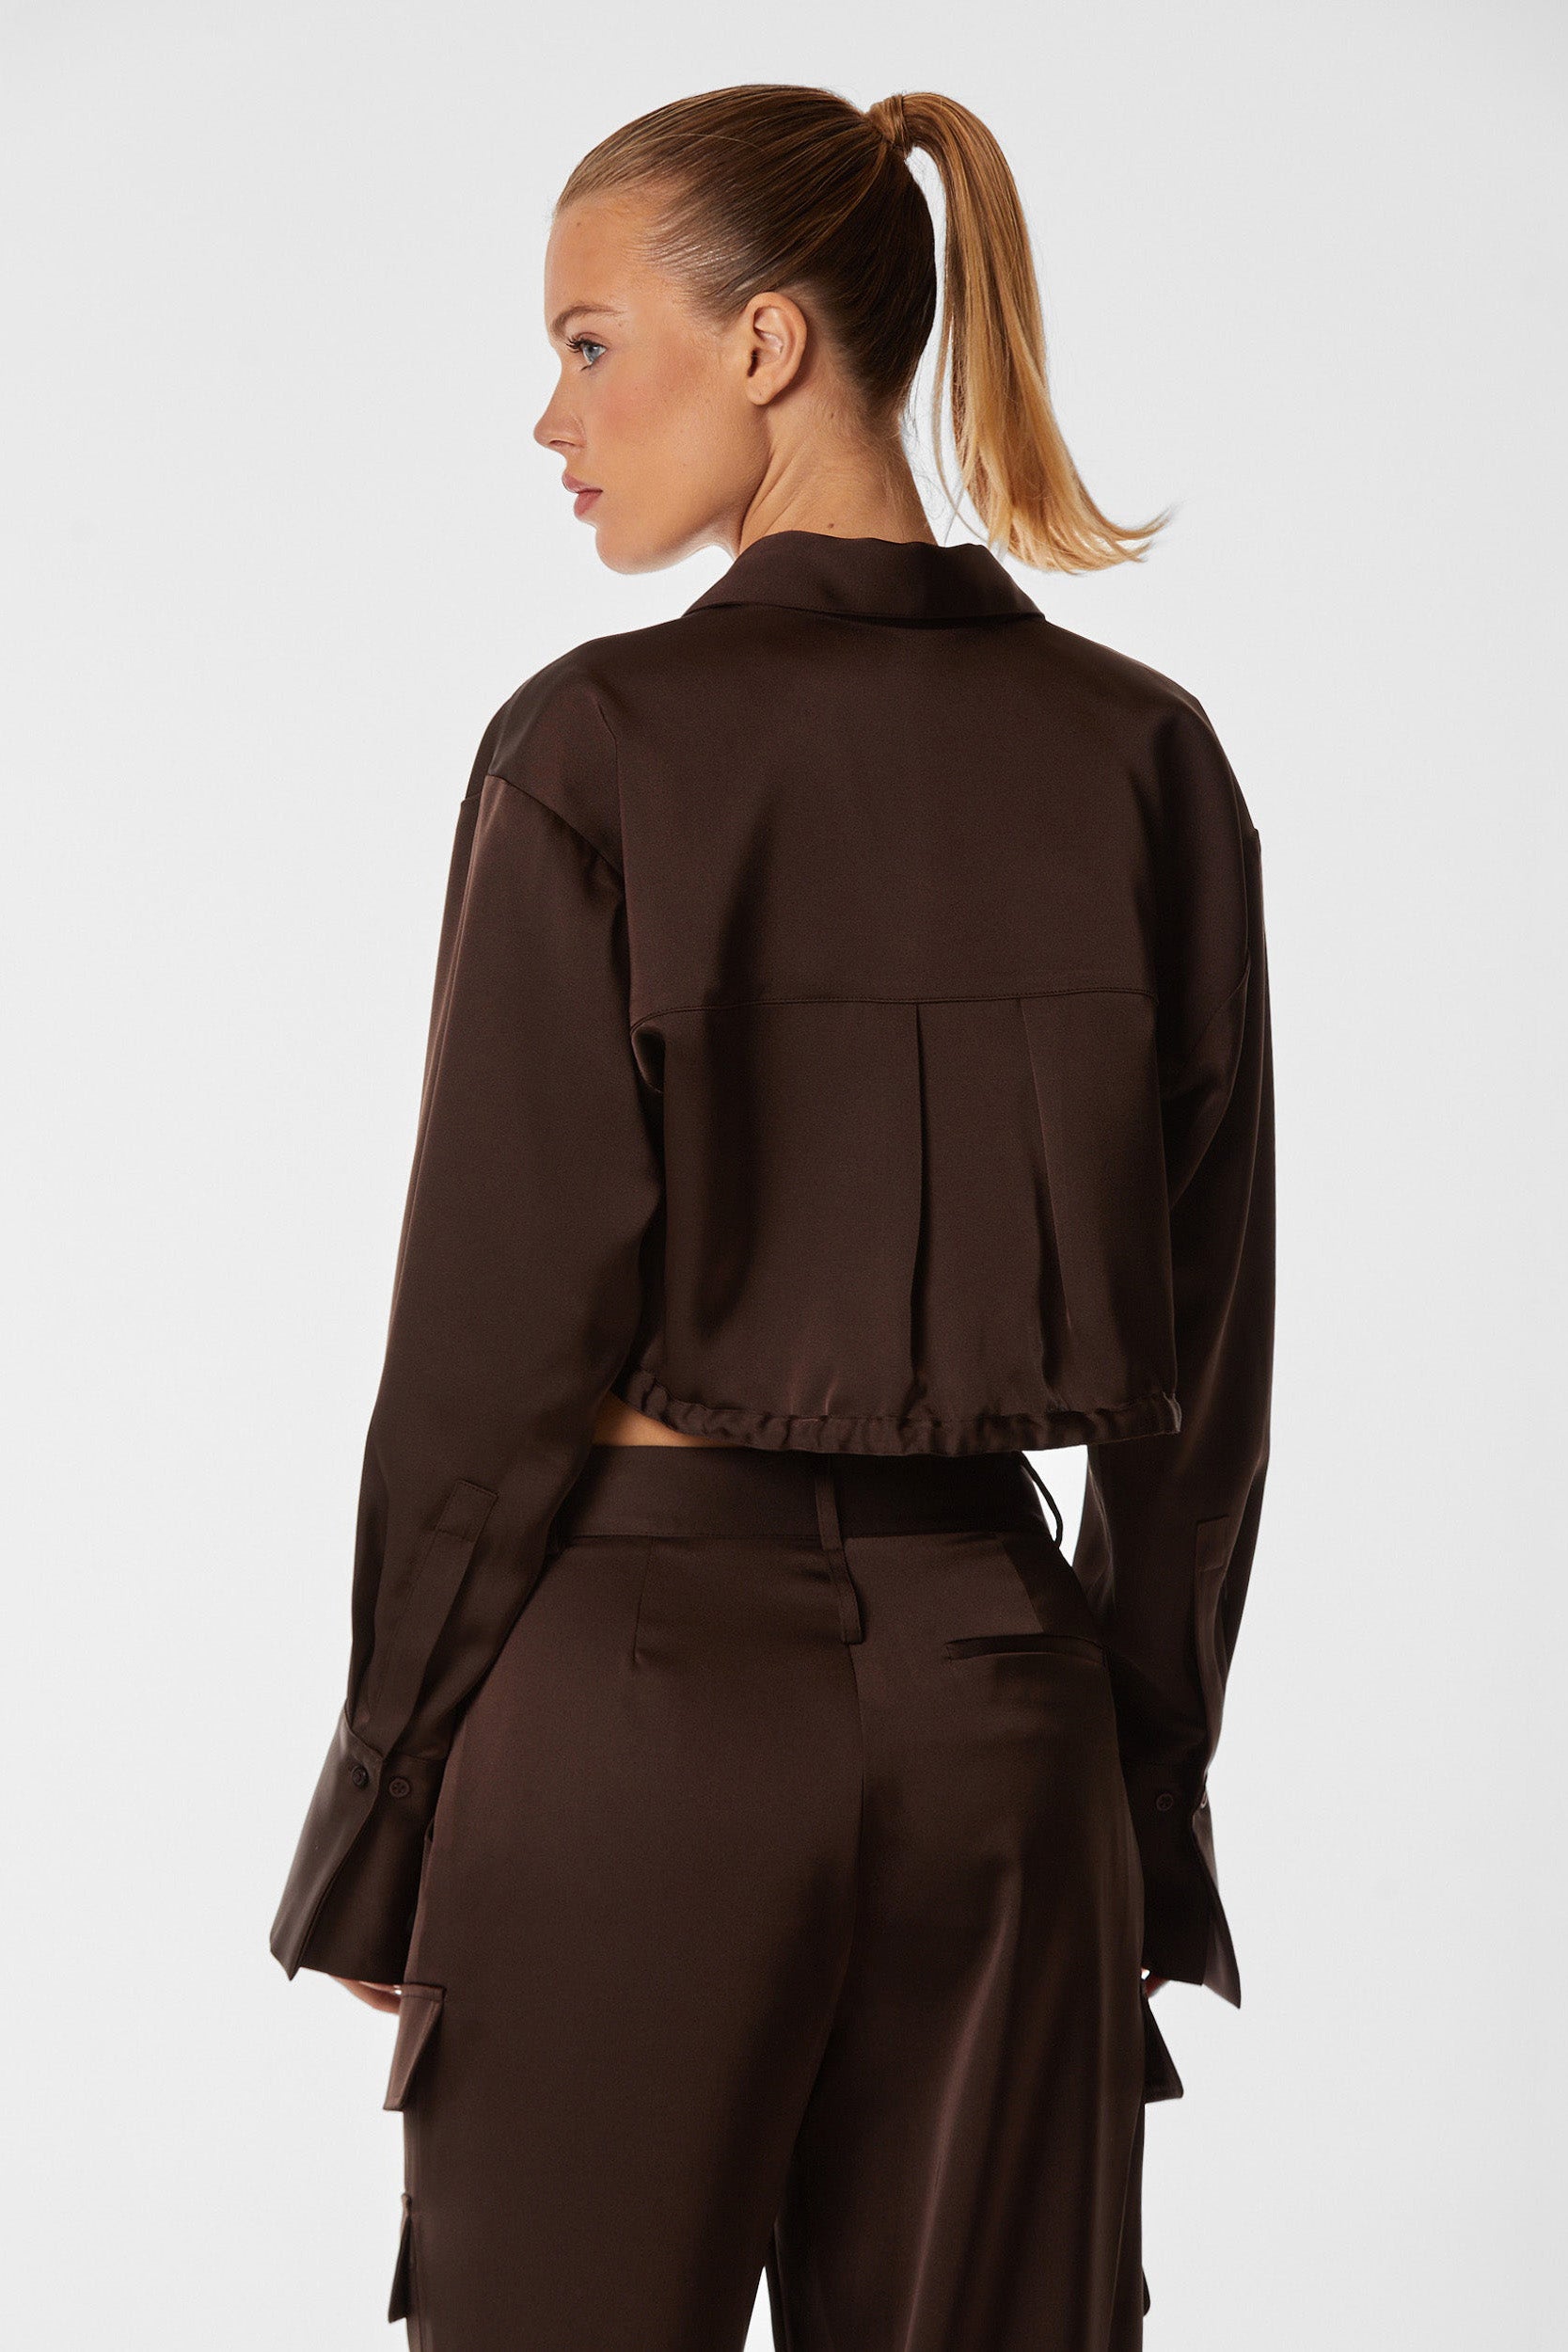 A woman with long blonde hair tied in a ponytail is shown from the side, wearing the Milan Satin Button Up in Espresso. The dark brown, long-sleeved cropped jacket and matching pants are made of smooth satin material with a slight sheen, featuring subtle cargo detailing for added style.